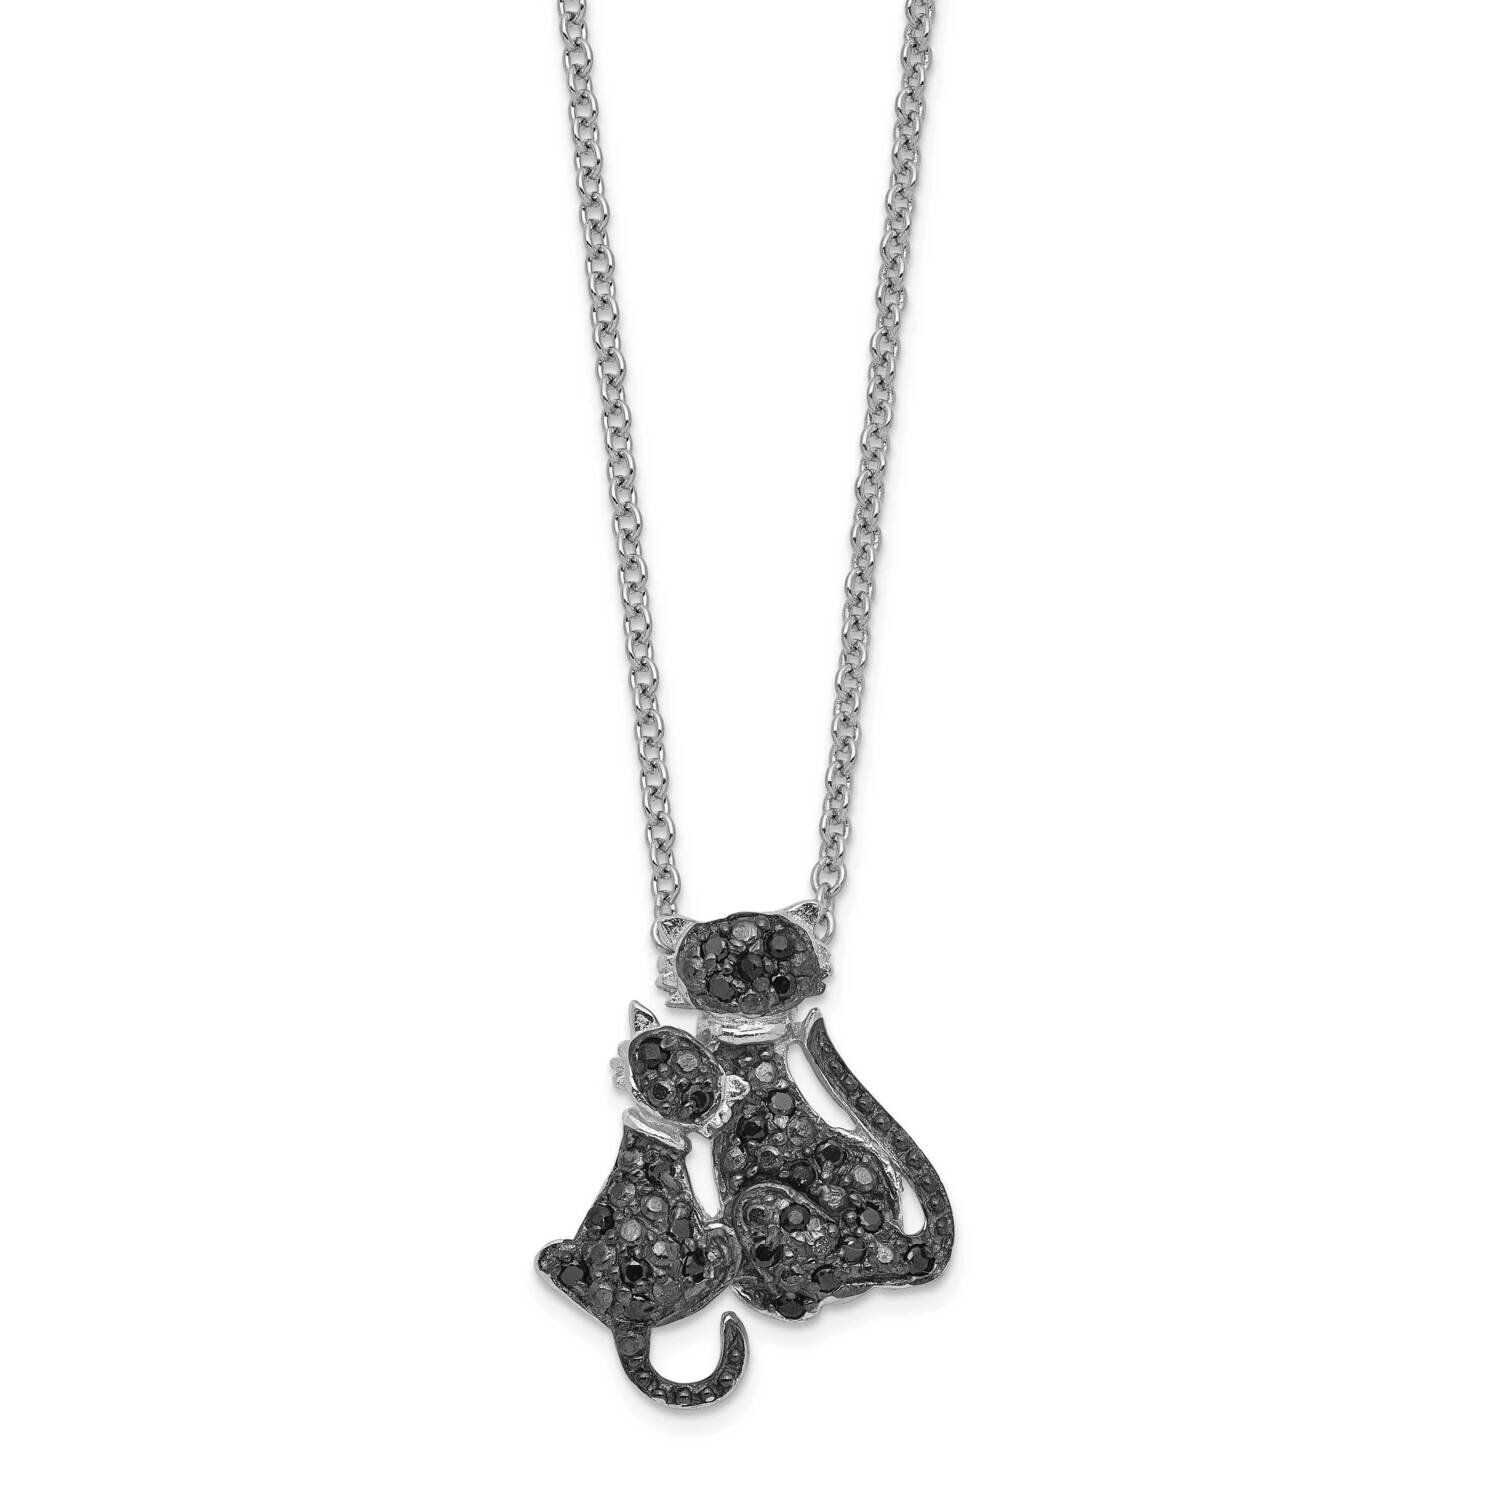 Black Rhodium Plated CZ Diamond Cats 18 Inch Necklace Sterling Silver QCM874-18